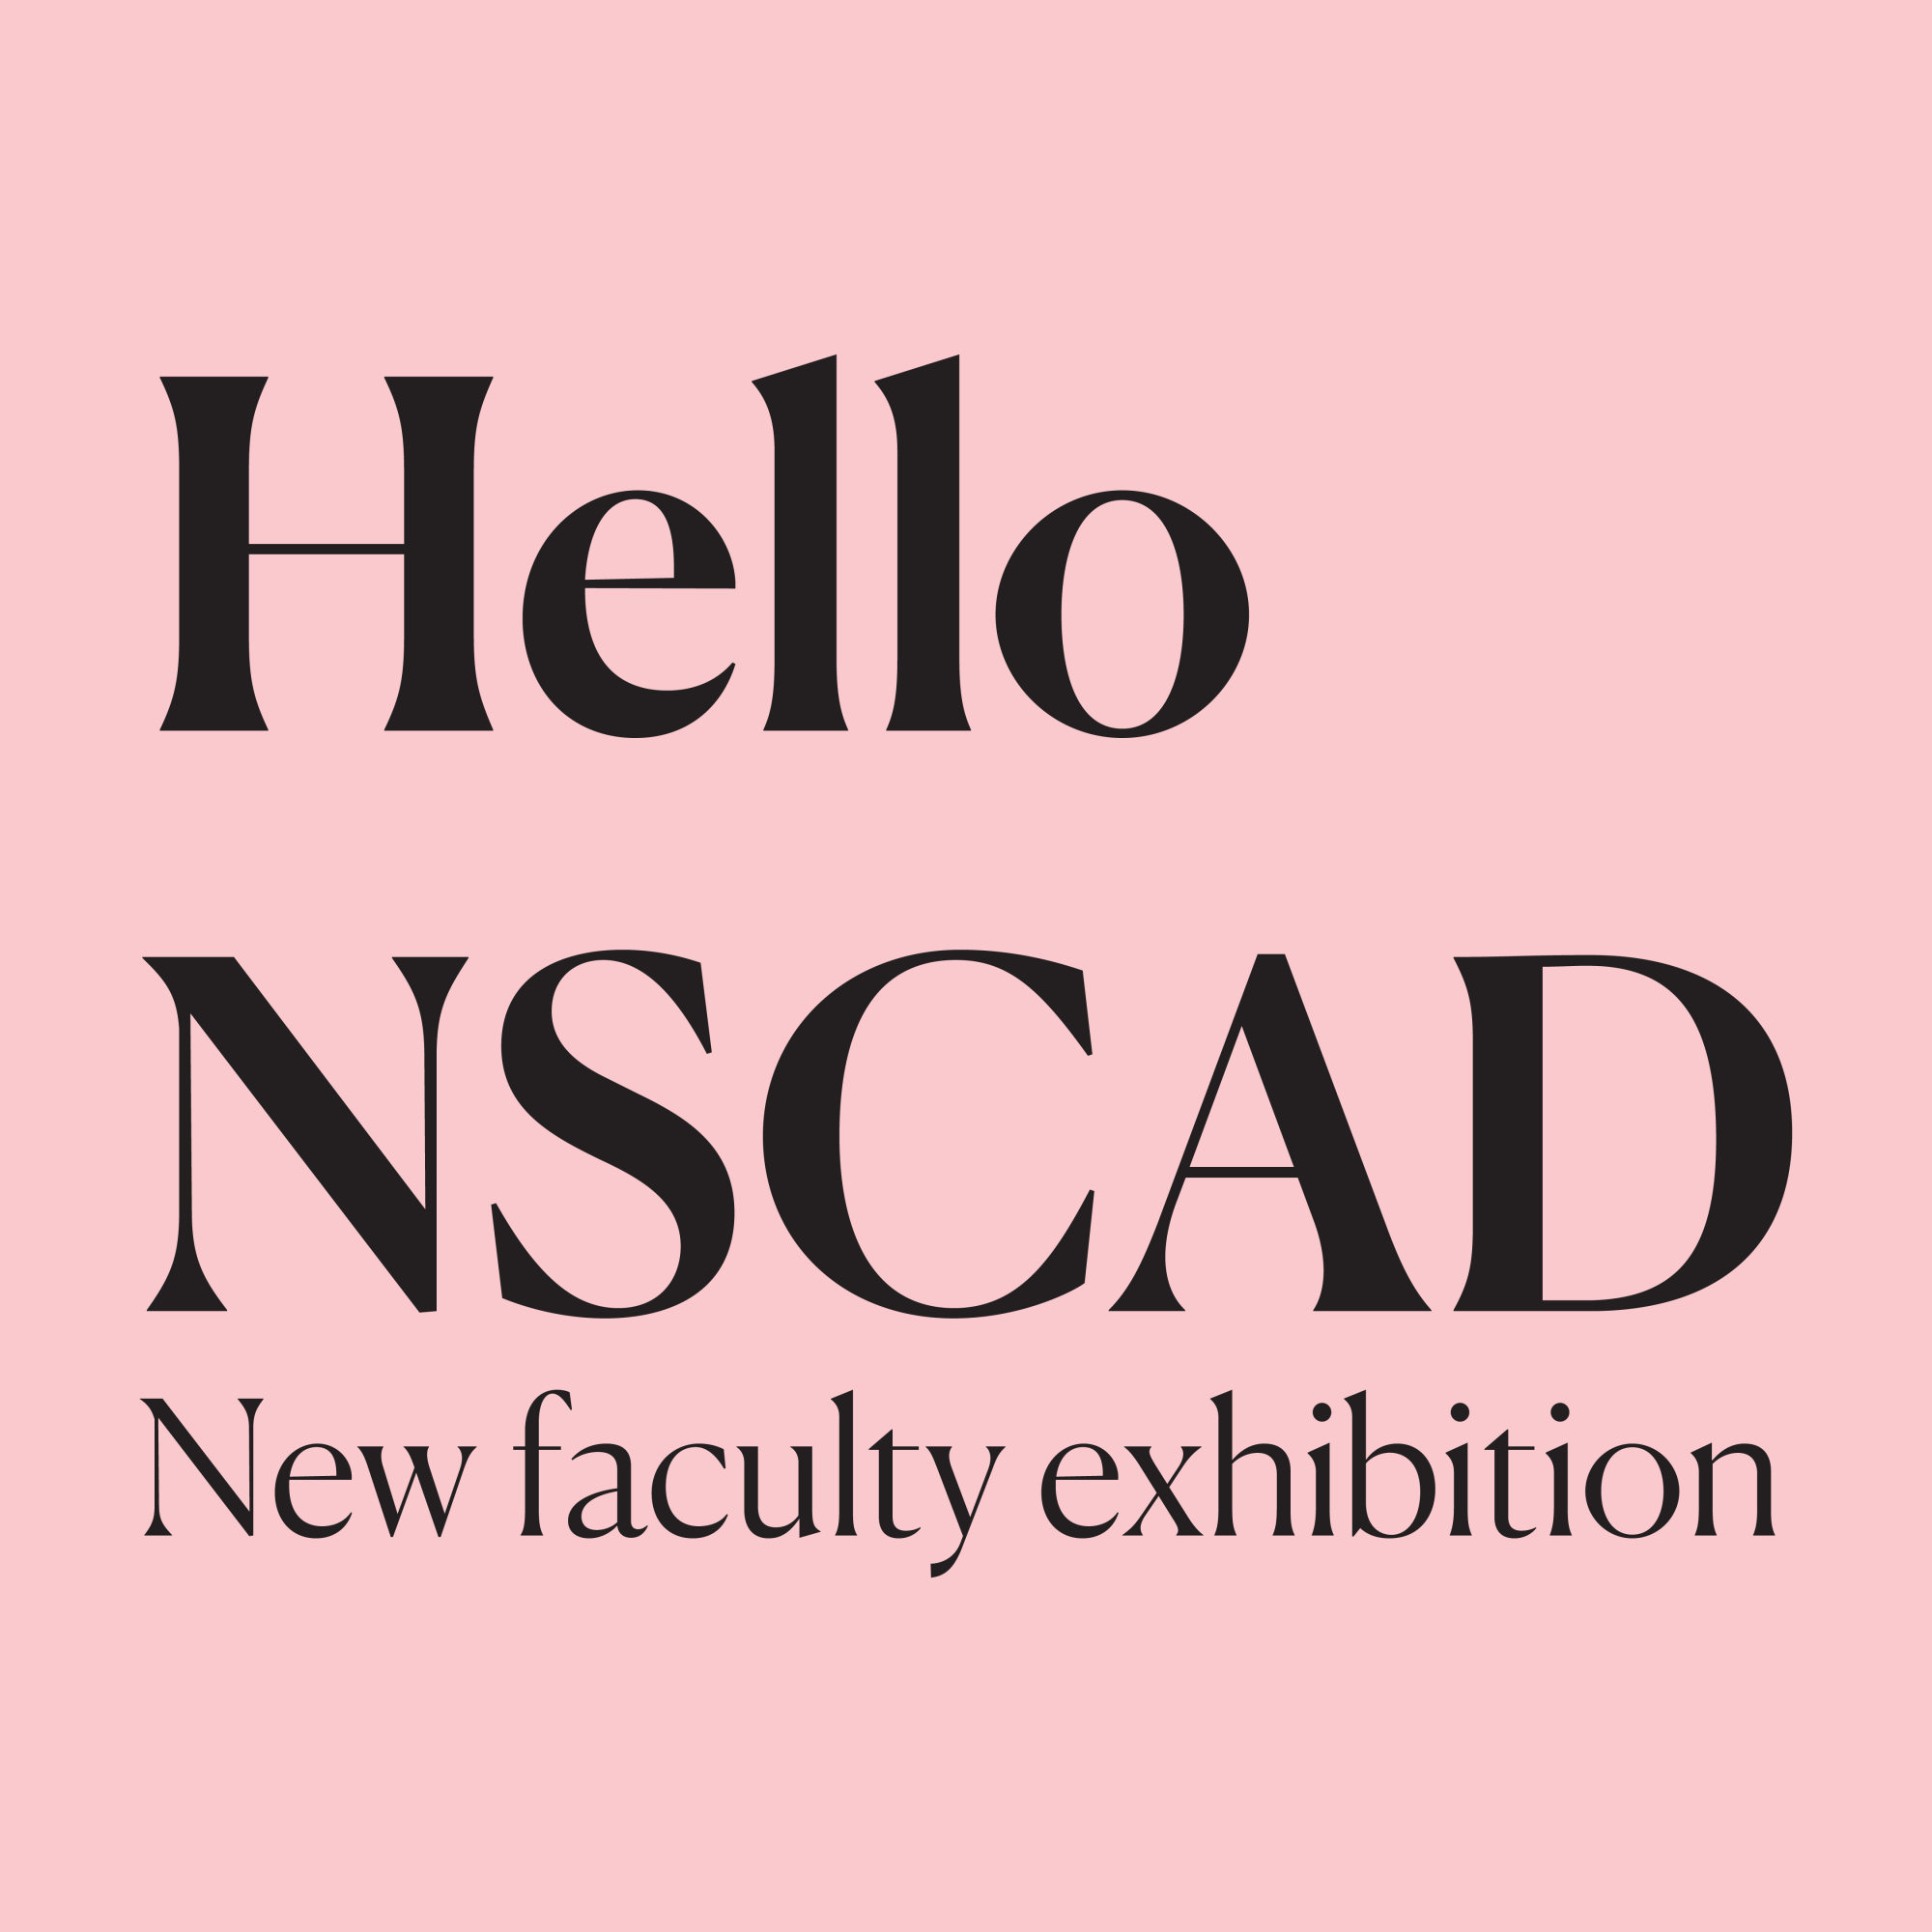 "Hello NSCAD, New faculty exhibition" in black text on pink background